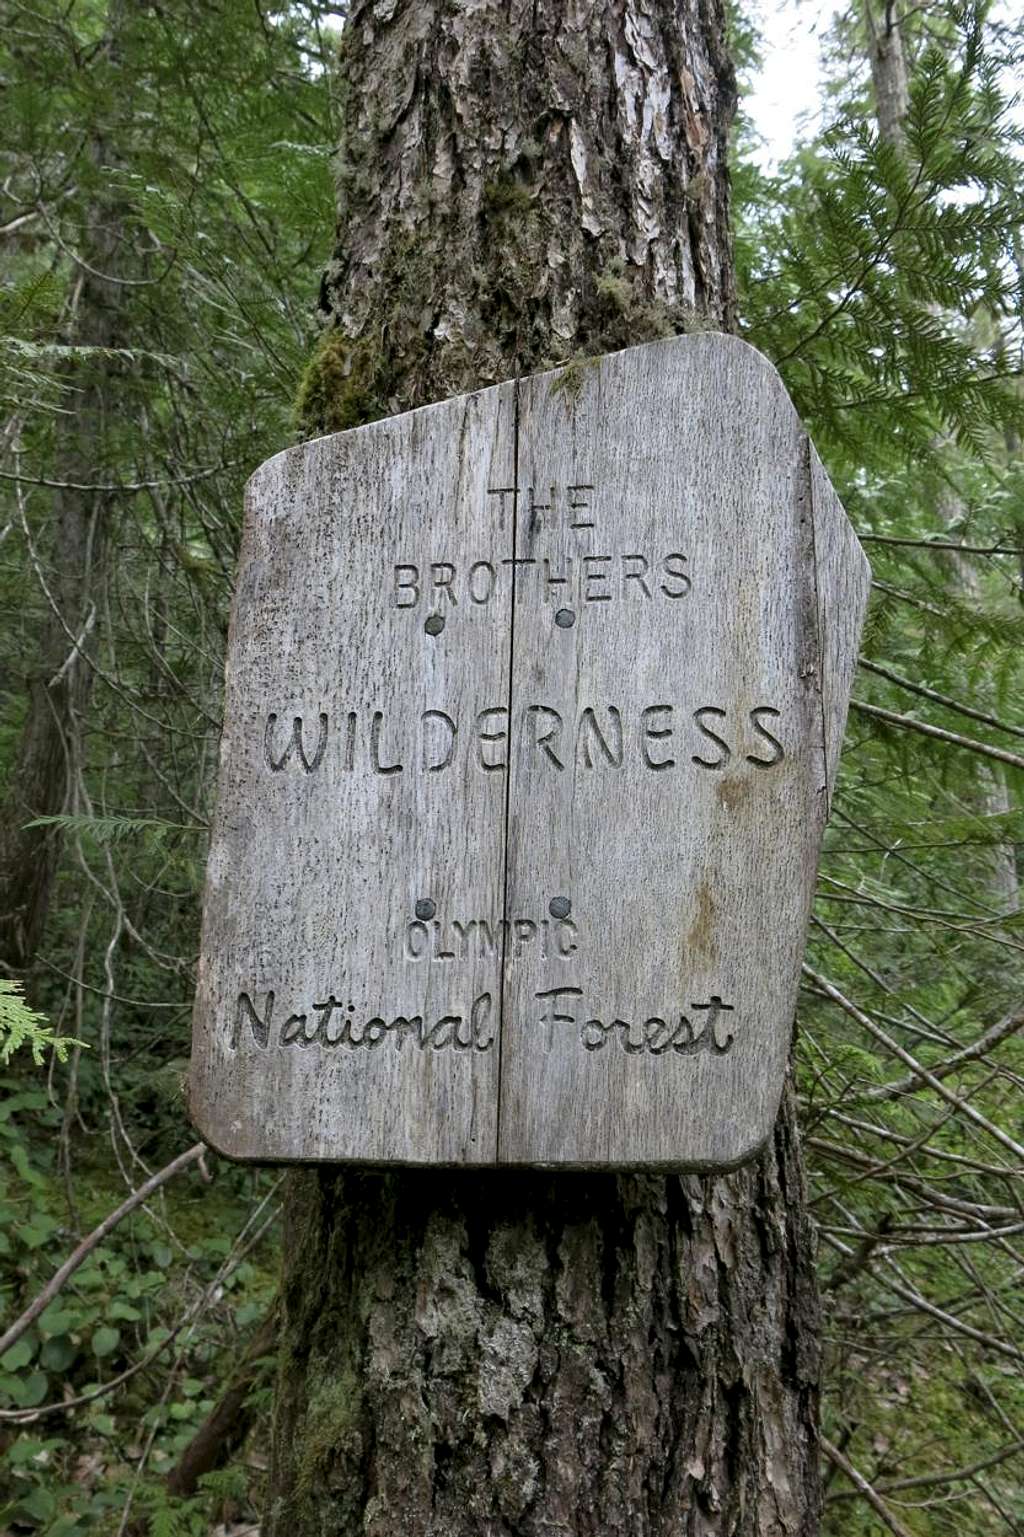 The Brothers Wilderness